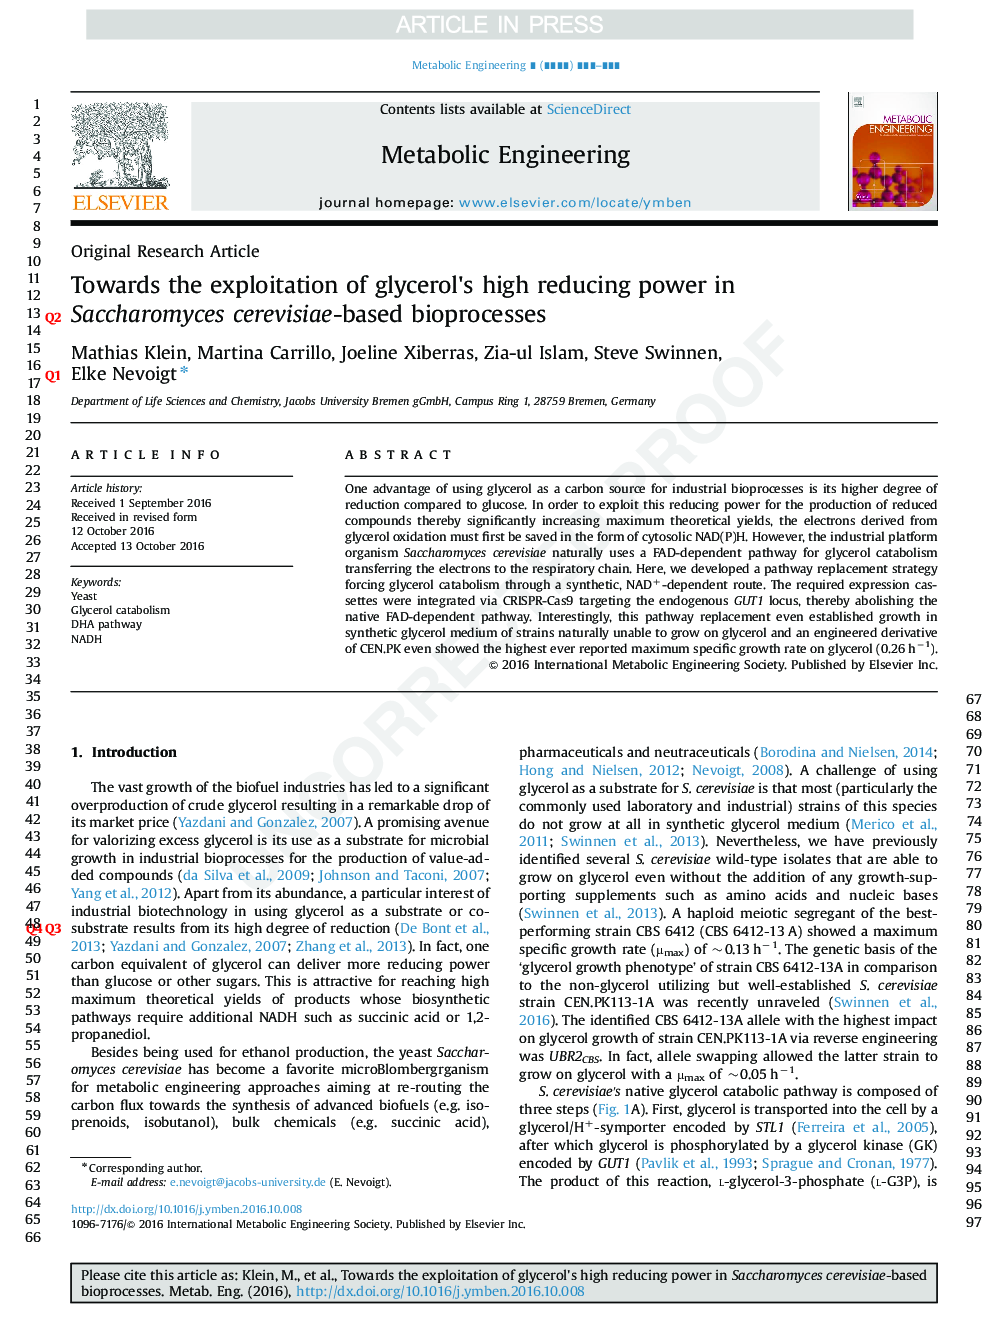 Towards the exploitation of glycerol's high reducing power in Saccharomyces cerevisiae-based bioprocesses